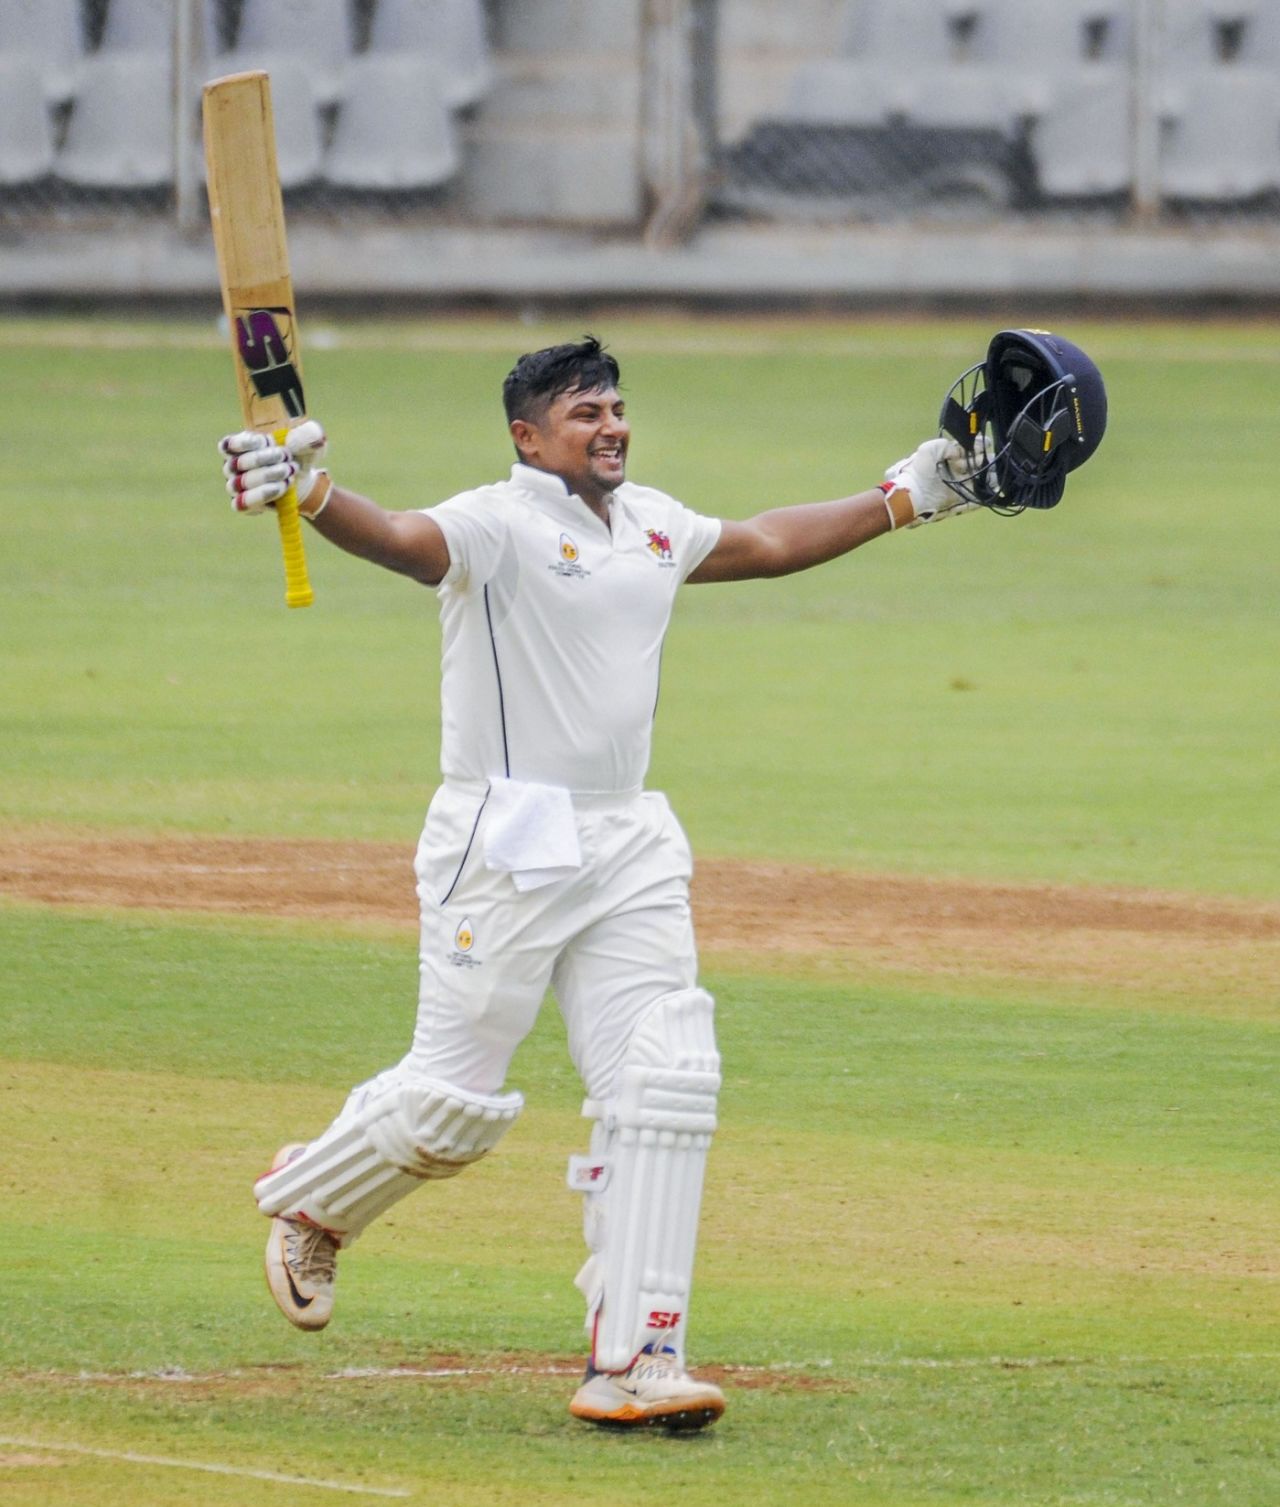 Sarfaraz Khan extended his rich form with another hundred, Ranji Trophy 2019-20, February 12, 2020